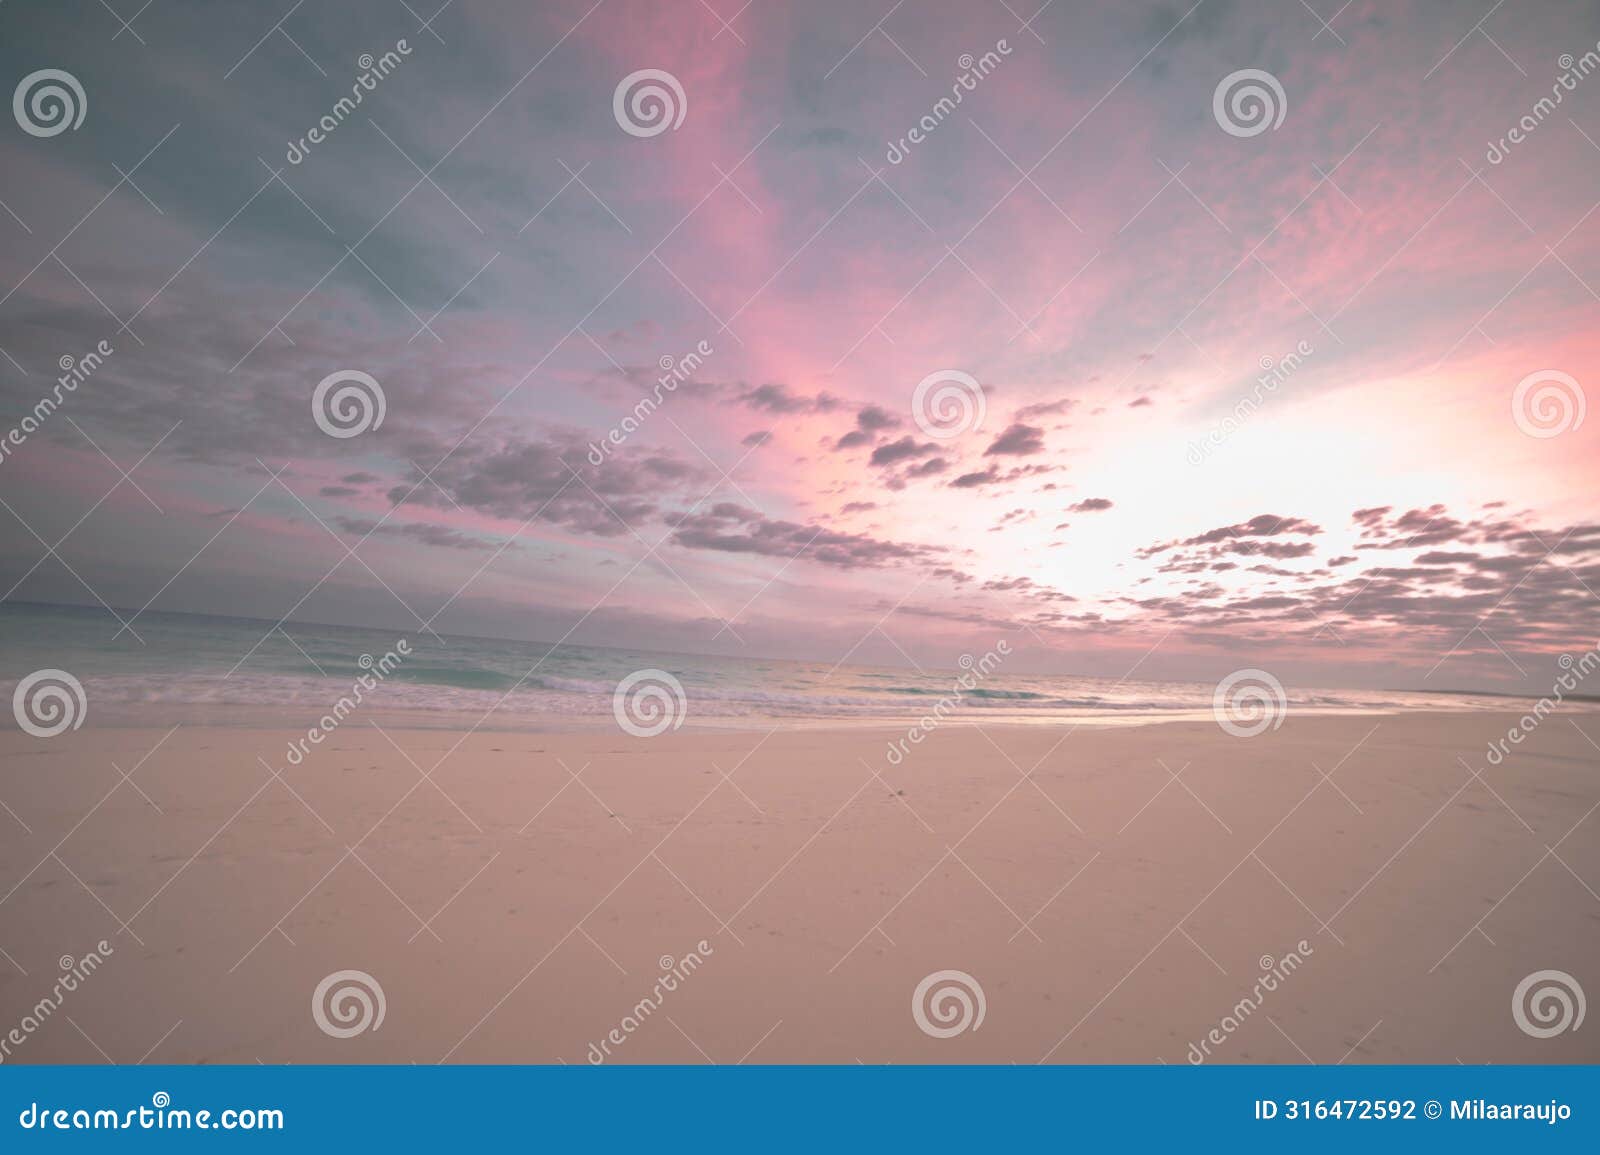 dreamlike tropical white sand beach oceanscape pink sunrise sky landscape photography natural background